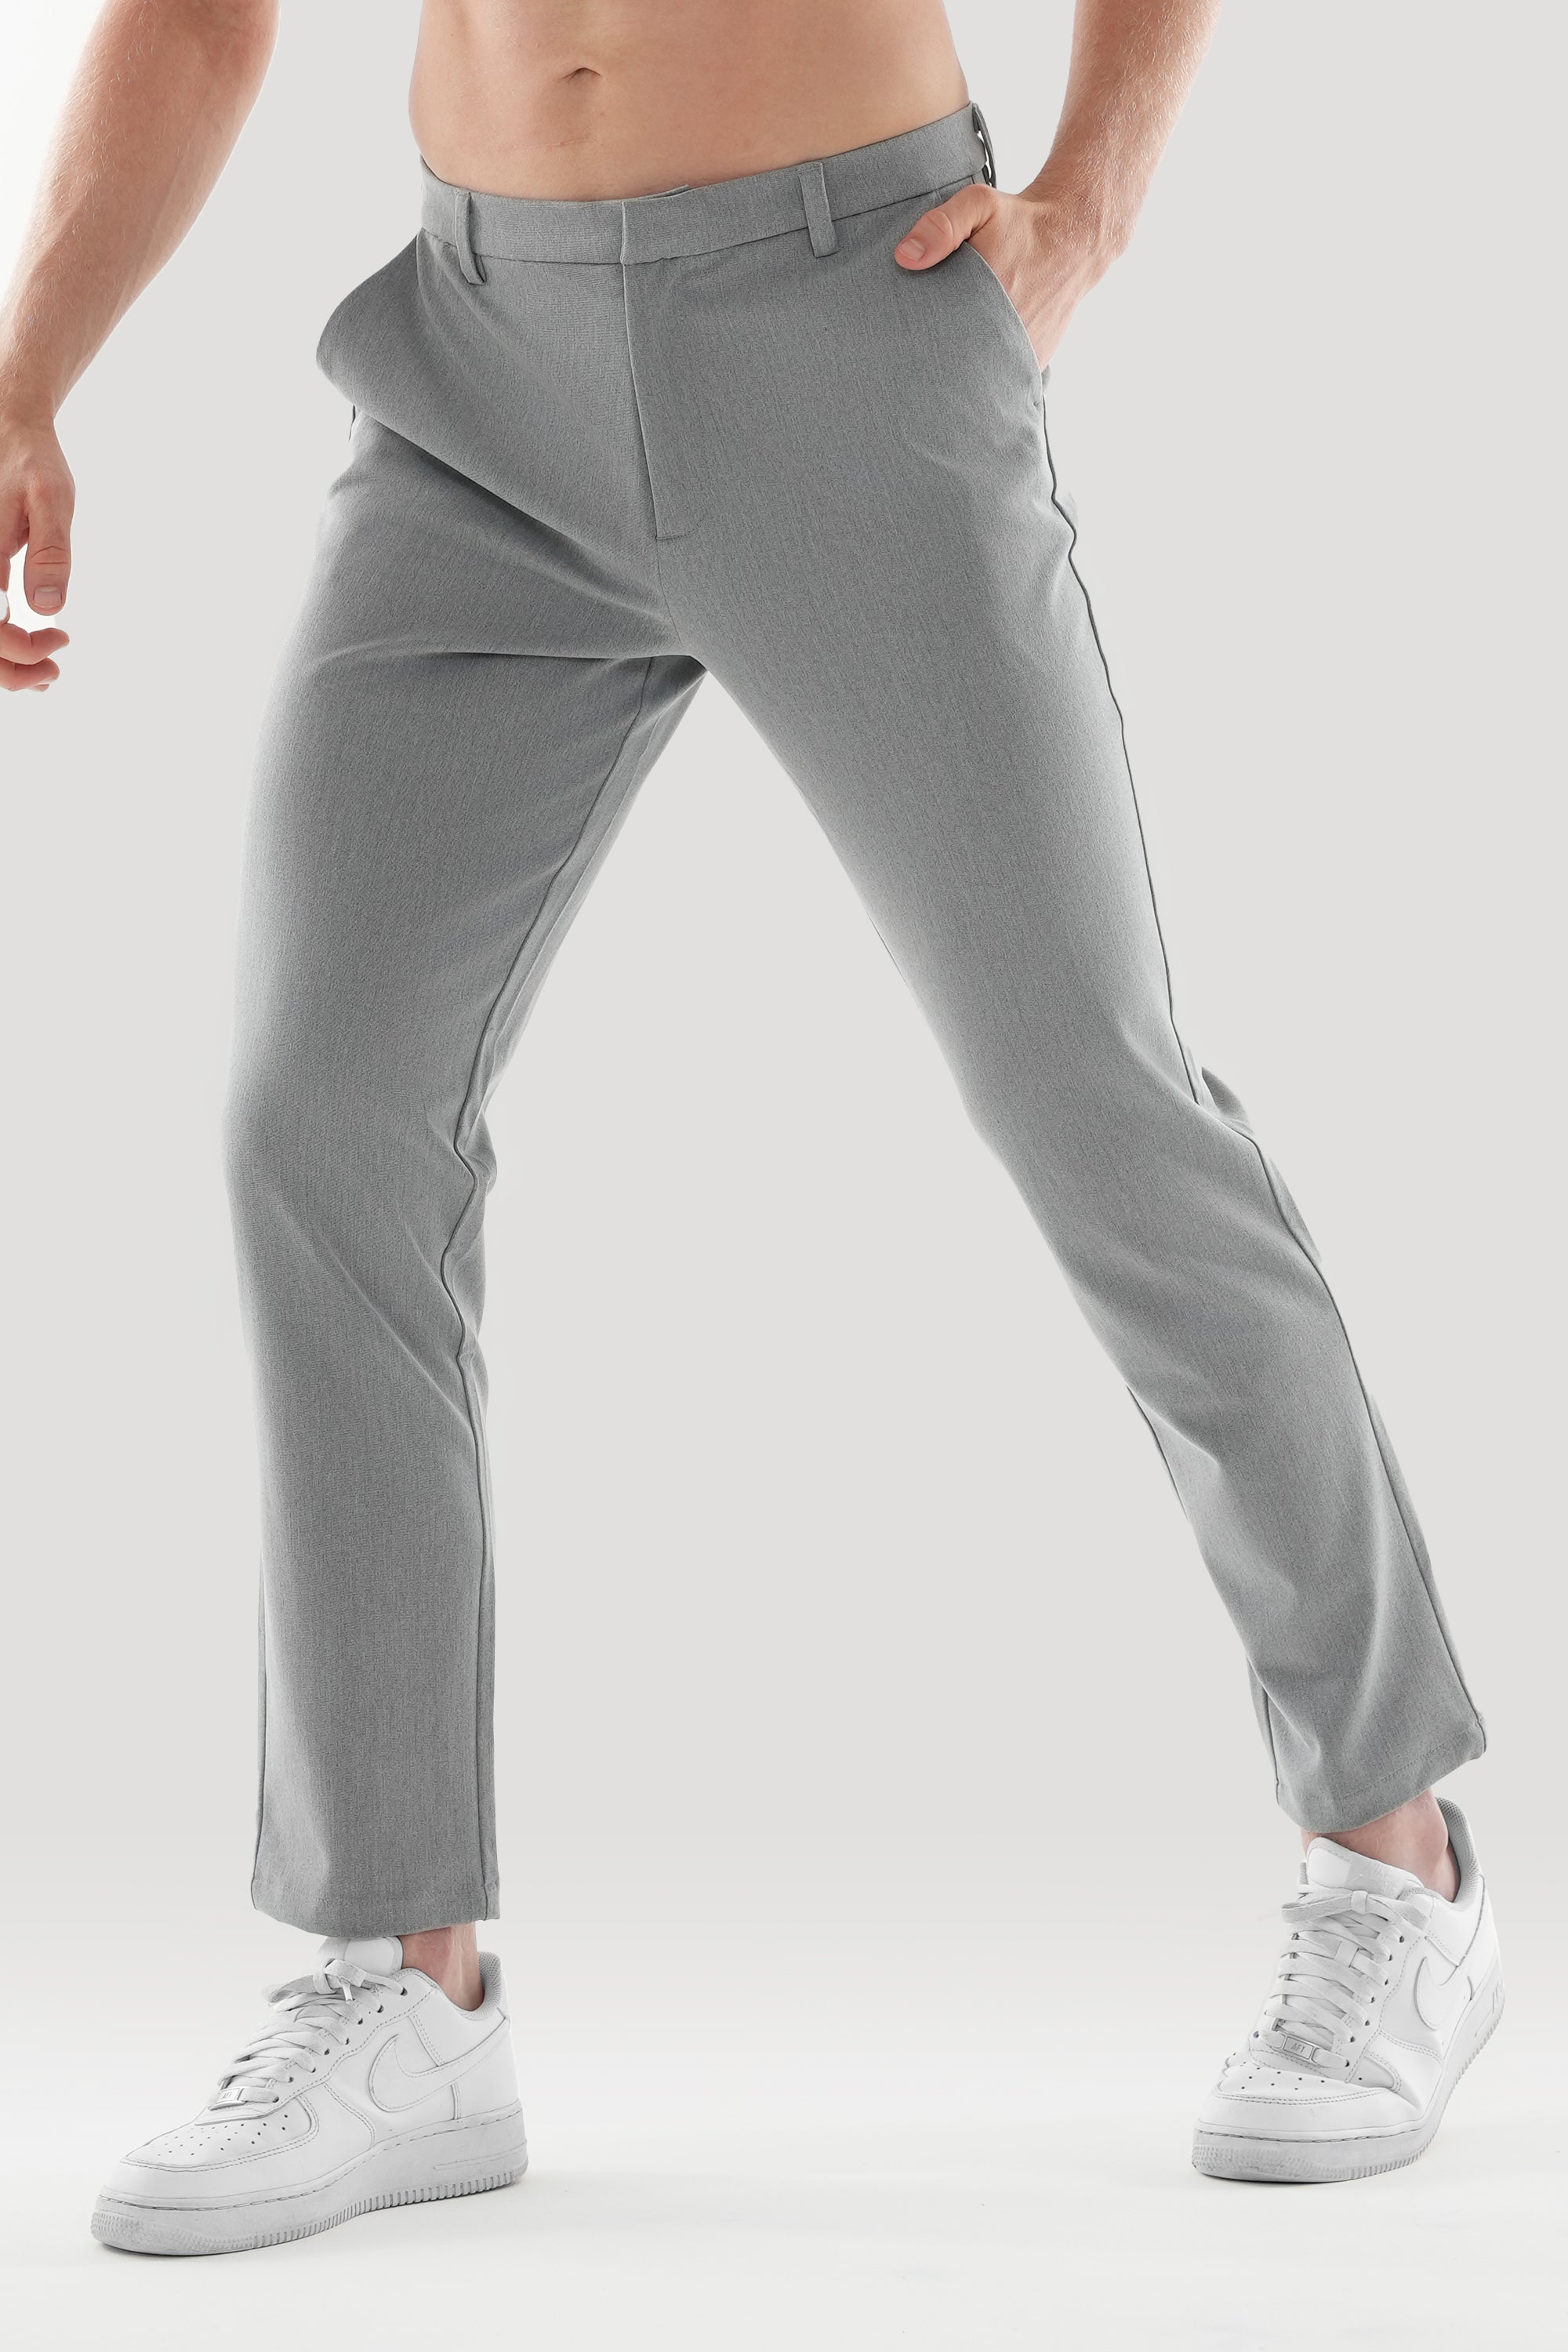 THE LUCIA TROUSERS - LIGHT GREY